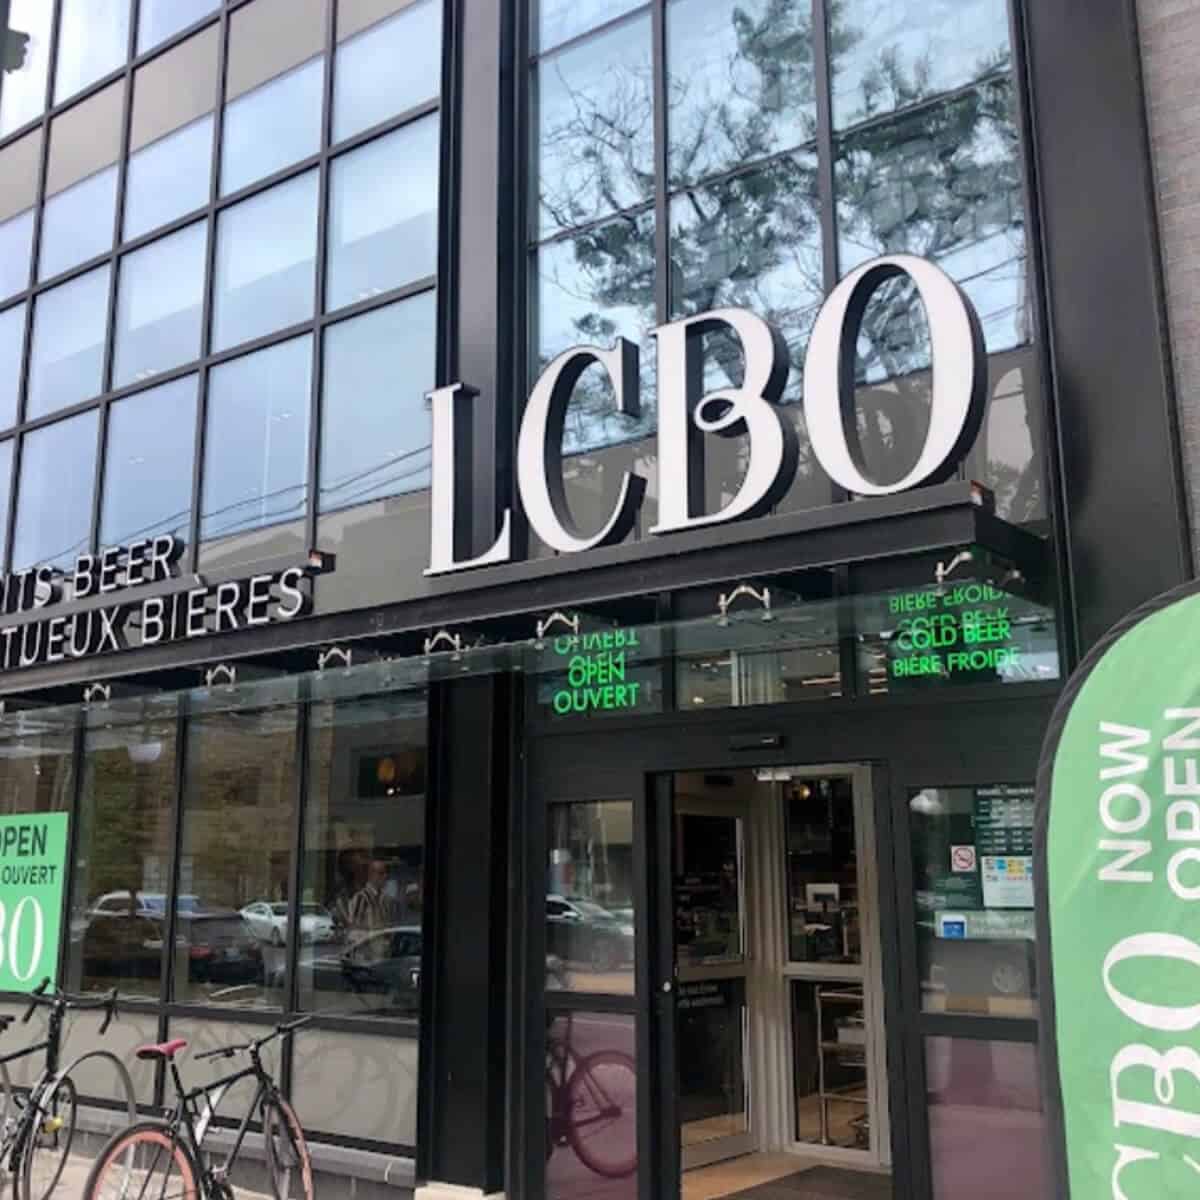 LCBO Toronto: Locations, Hours & More